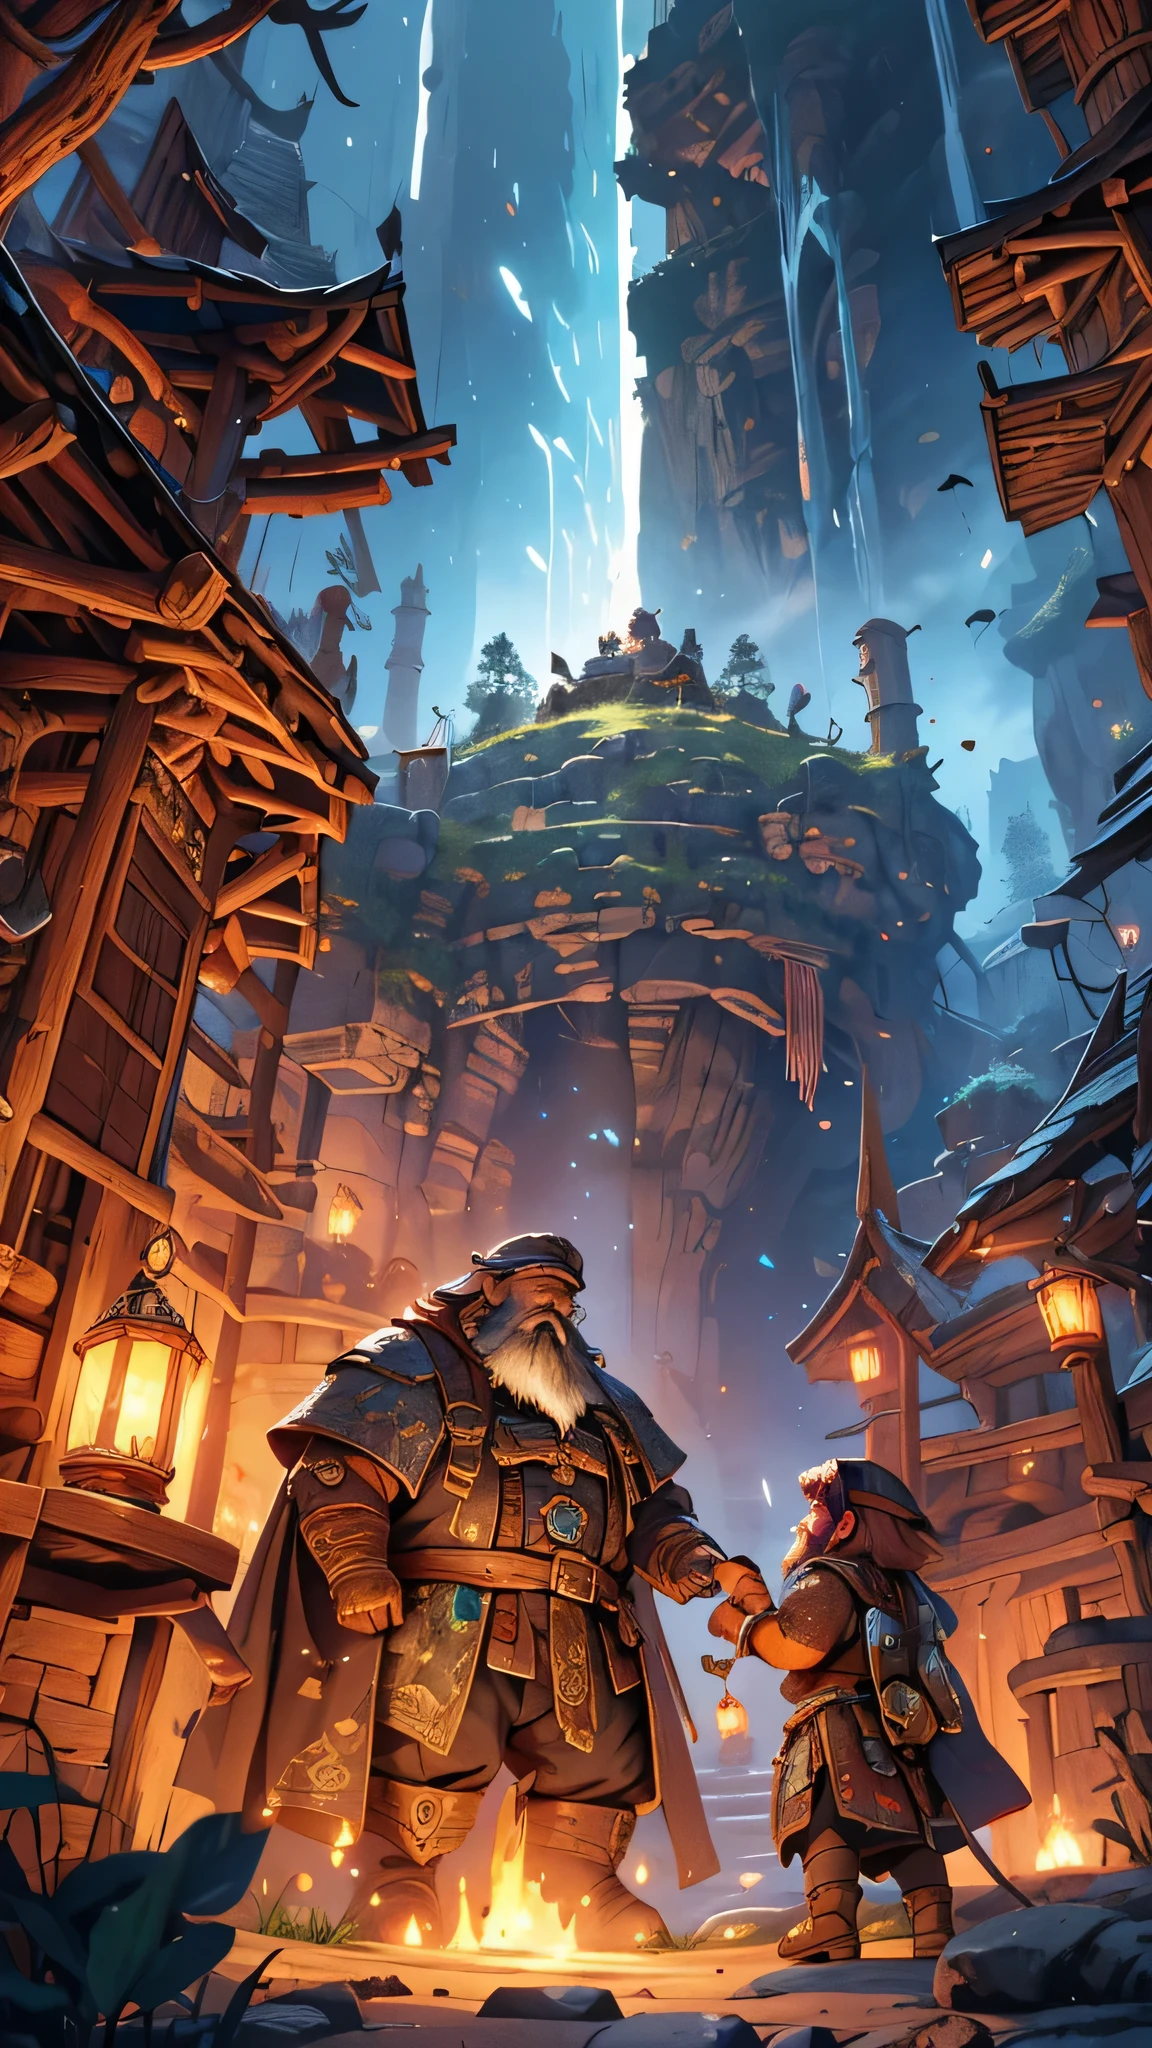  illustration showcasing dwarves diligently mining for minerals and iron ore in the depts, dwarfs with beard, fantasy-themed mine shaft, intricate line detail, vibrant colors, fantastical lighting, underground glow, mythical creatures lurking in shadows, highly detailed,